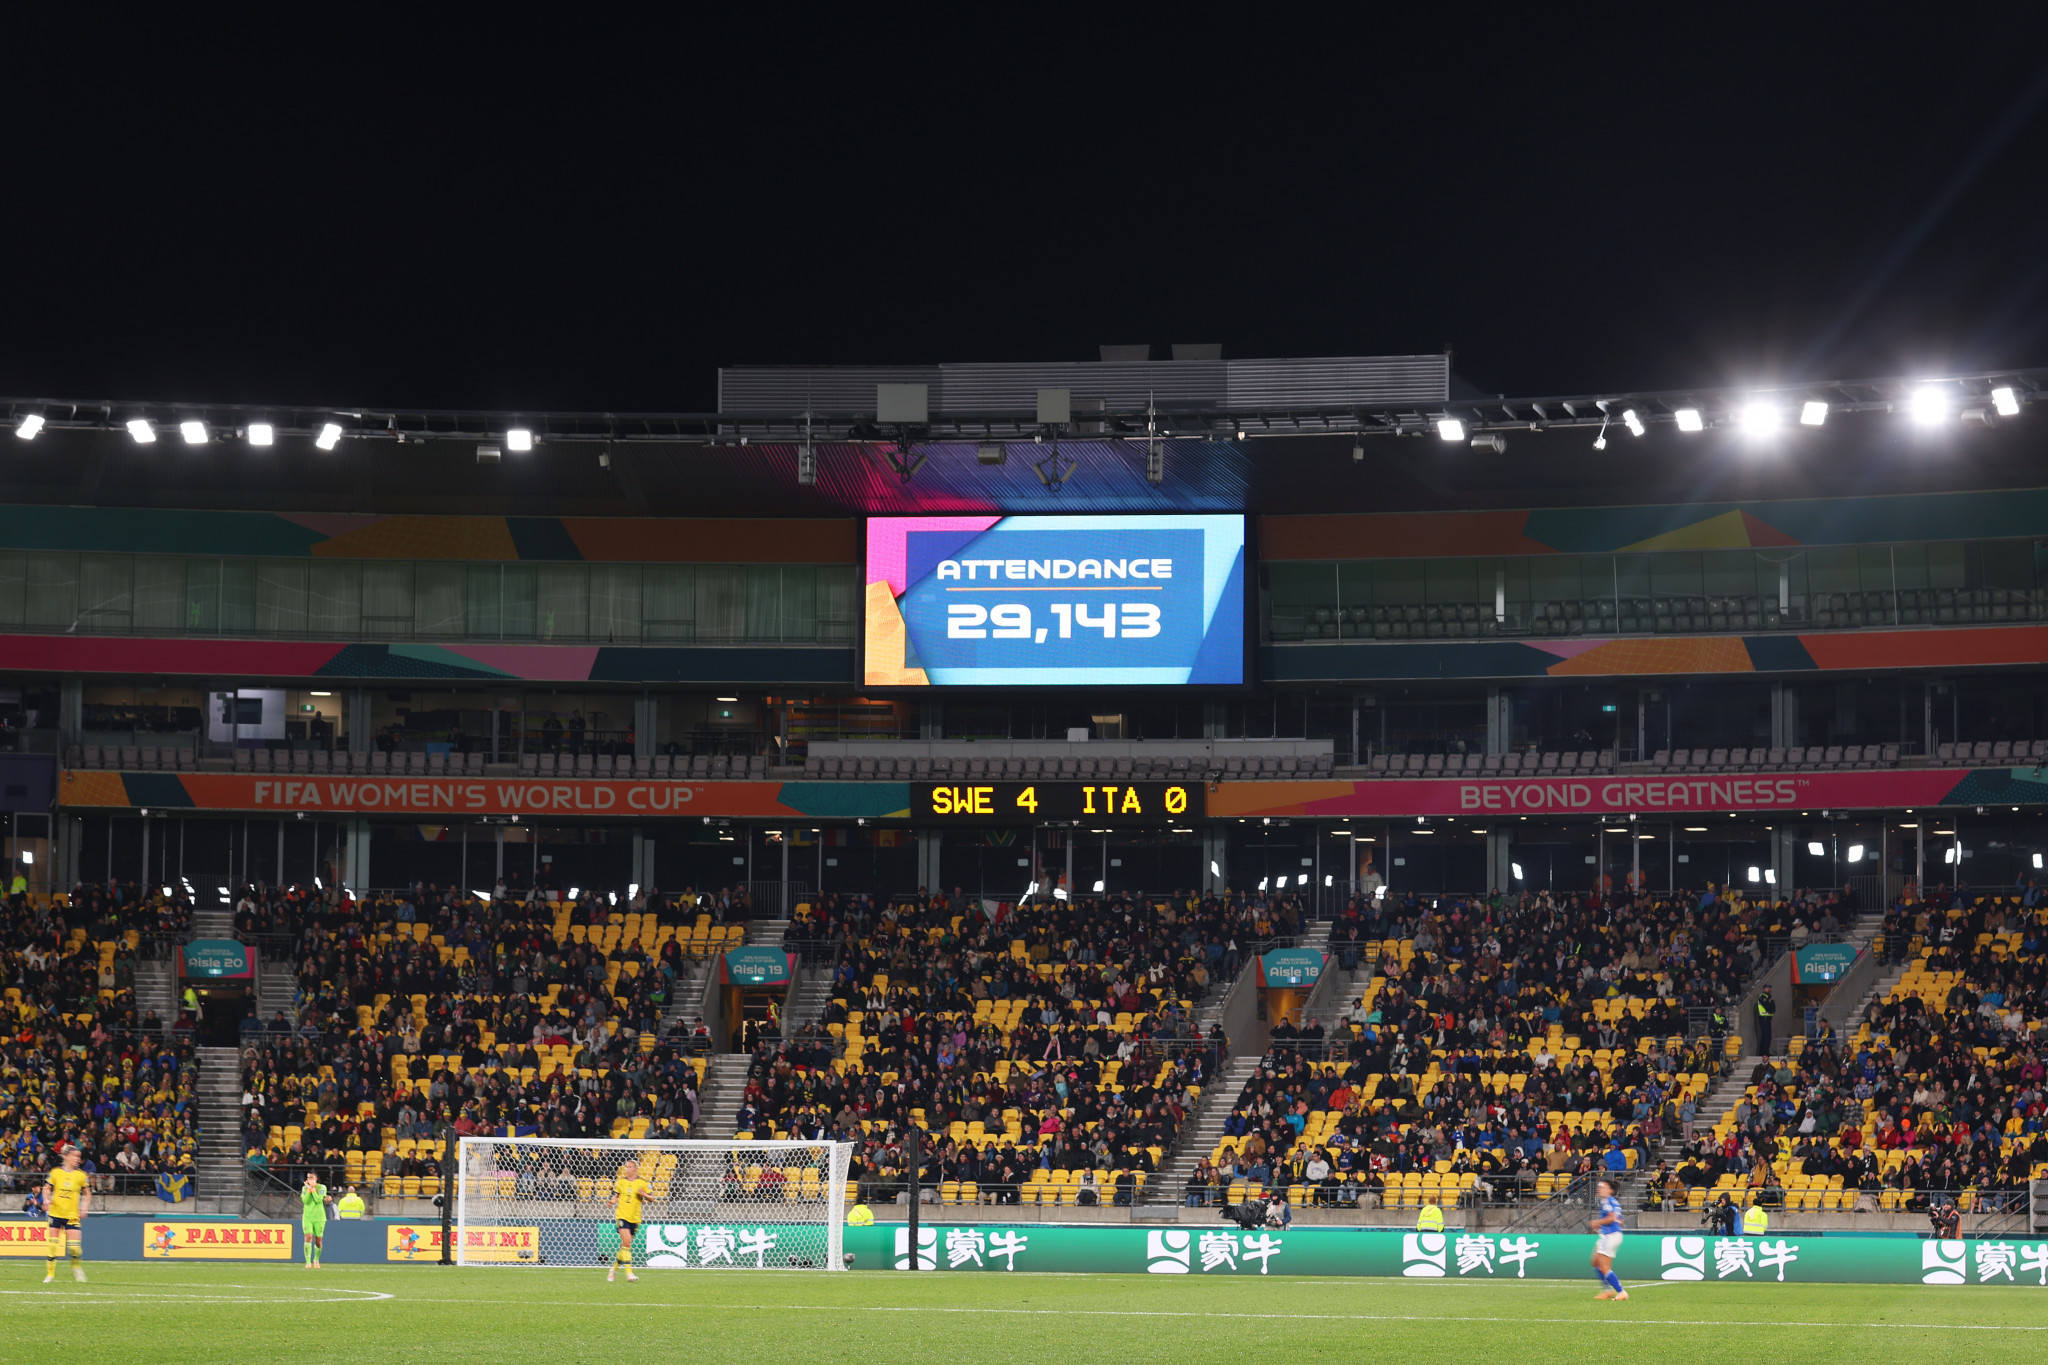 A crowd of just over 29,000 enjoyed the action in Wellington as Sweden overcame Italy 5-0 ©Getty Images